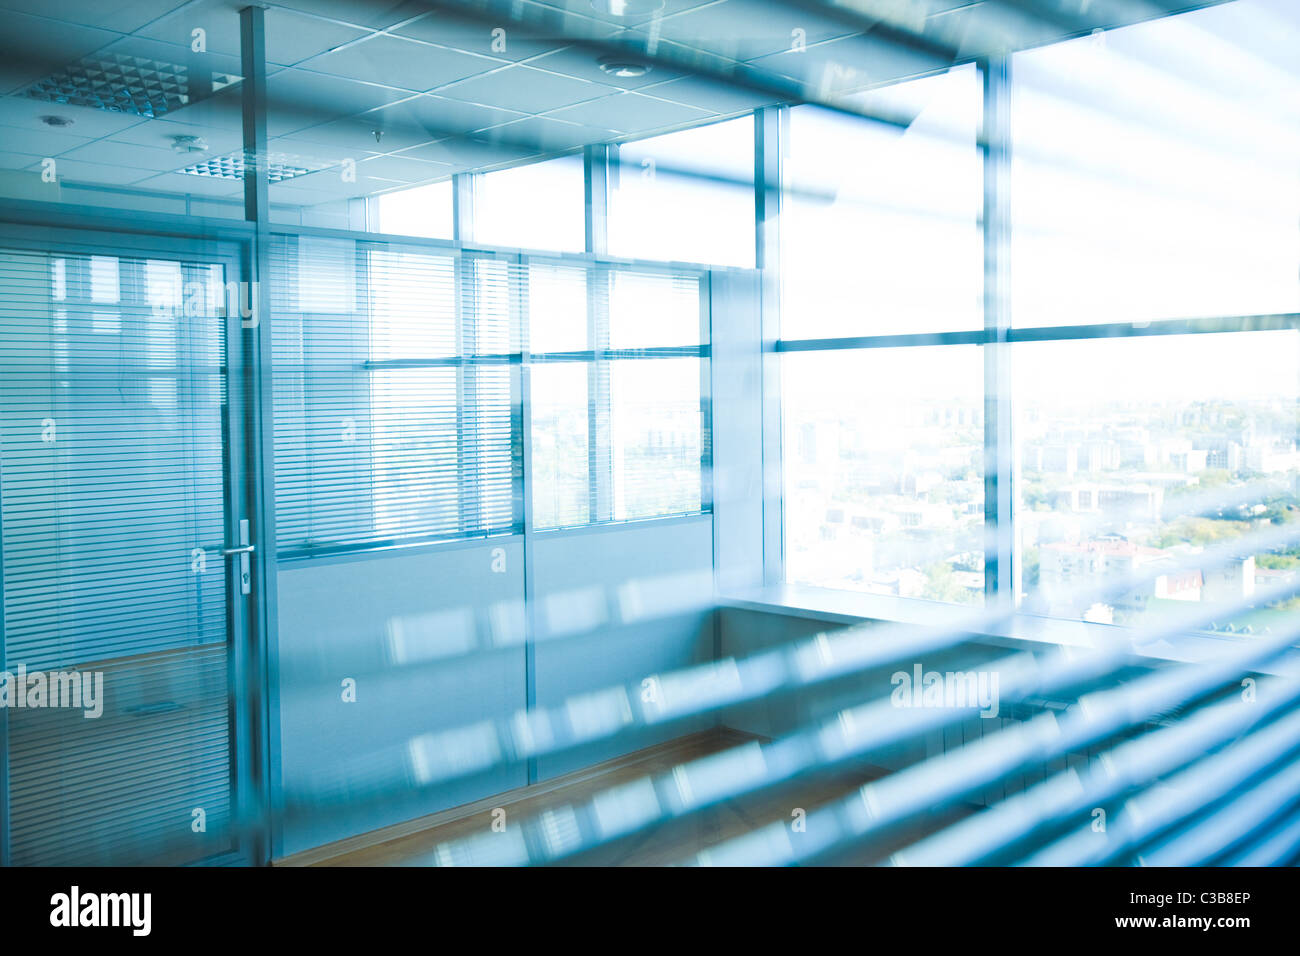 Image of corridor in office building with big windows passing daylight Stock Photo